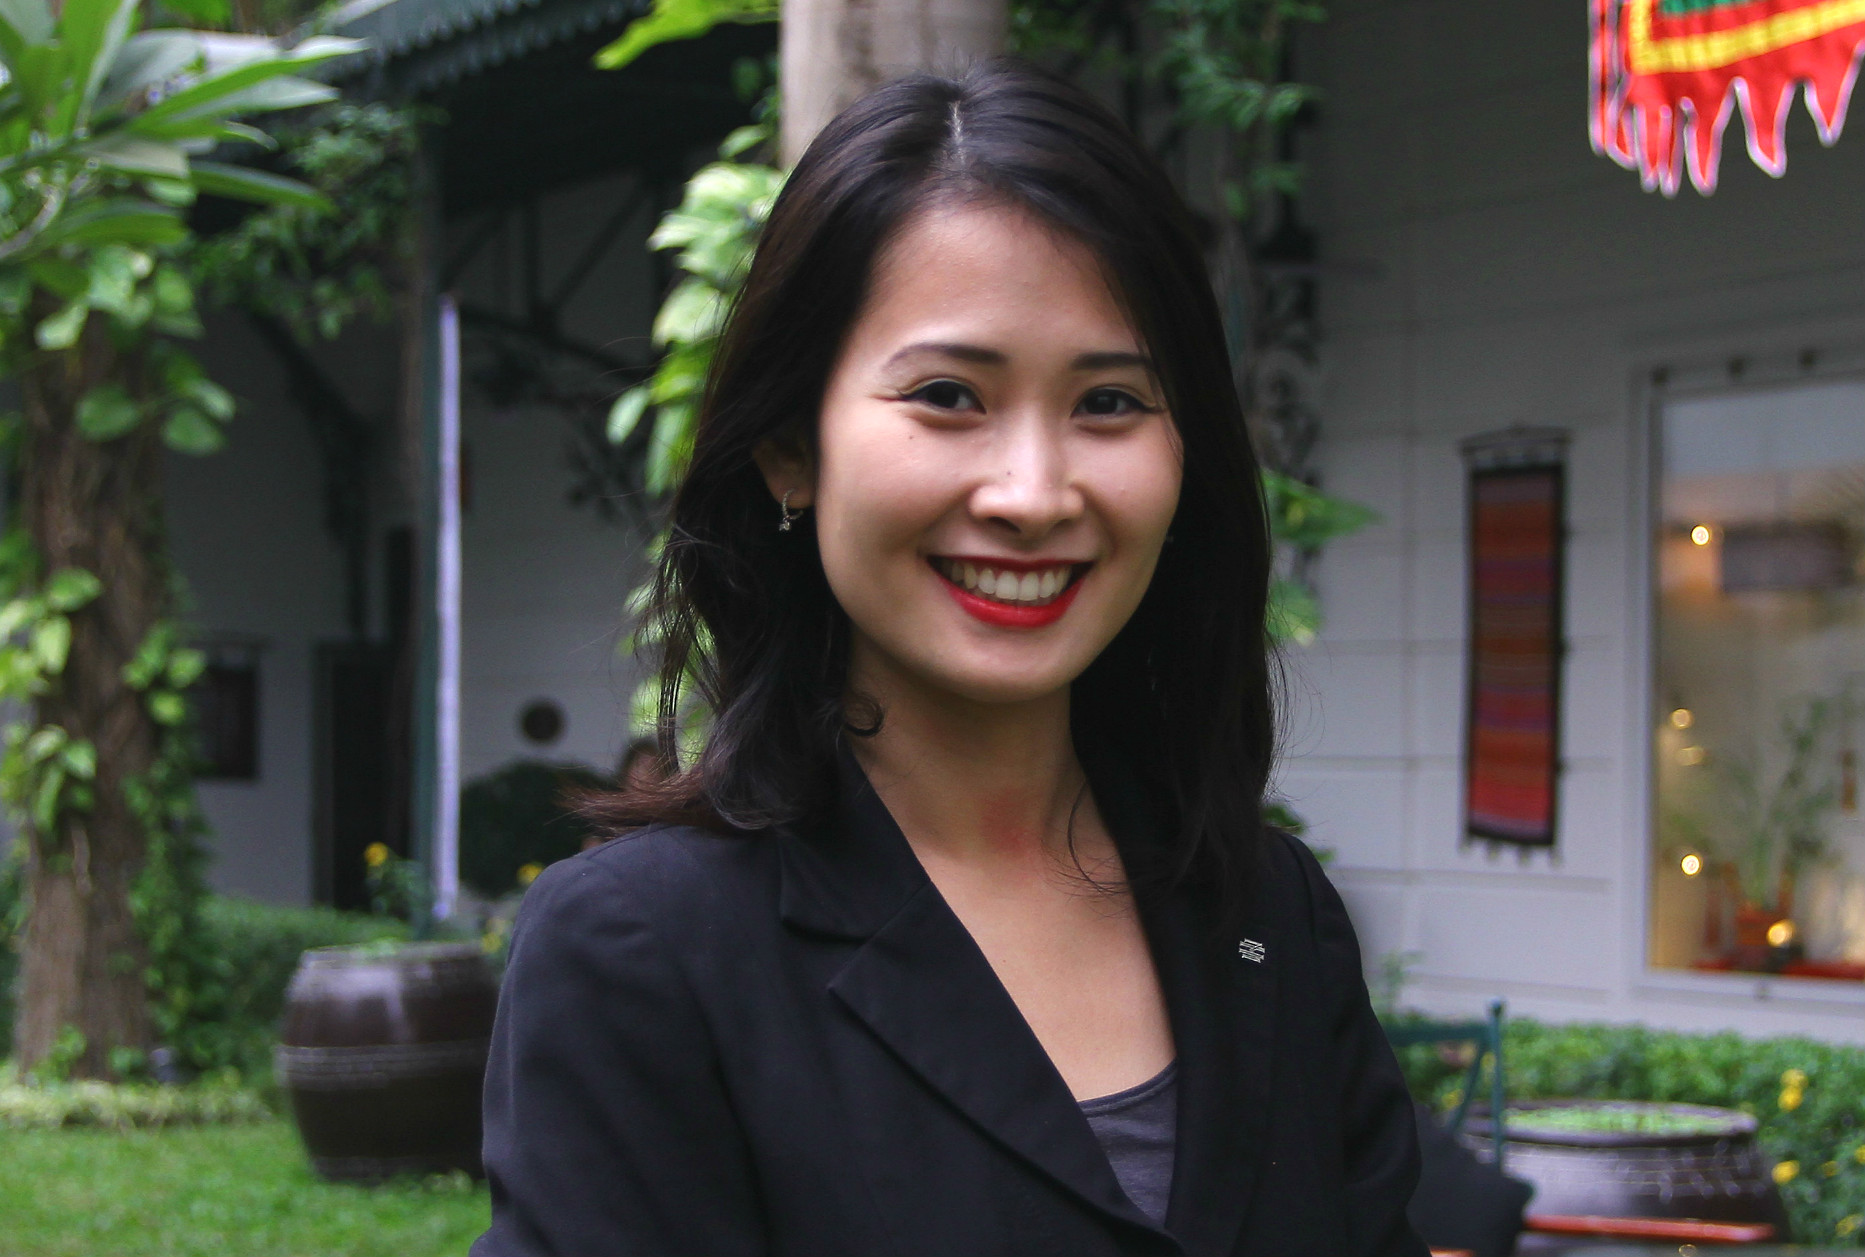 Dao Thu Trang is the Marketing Communications Manager at the Sofitel Legend Metropole in Hanoi.